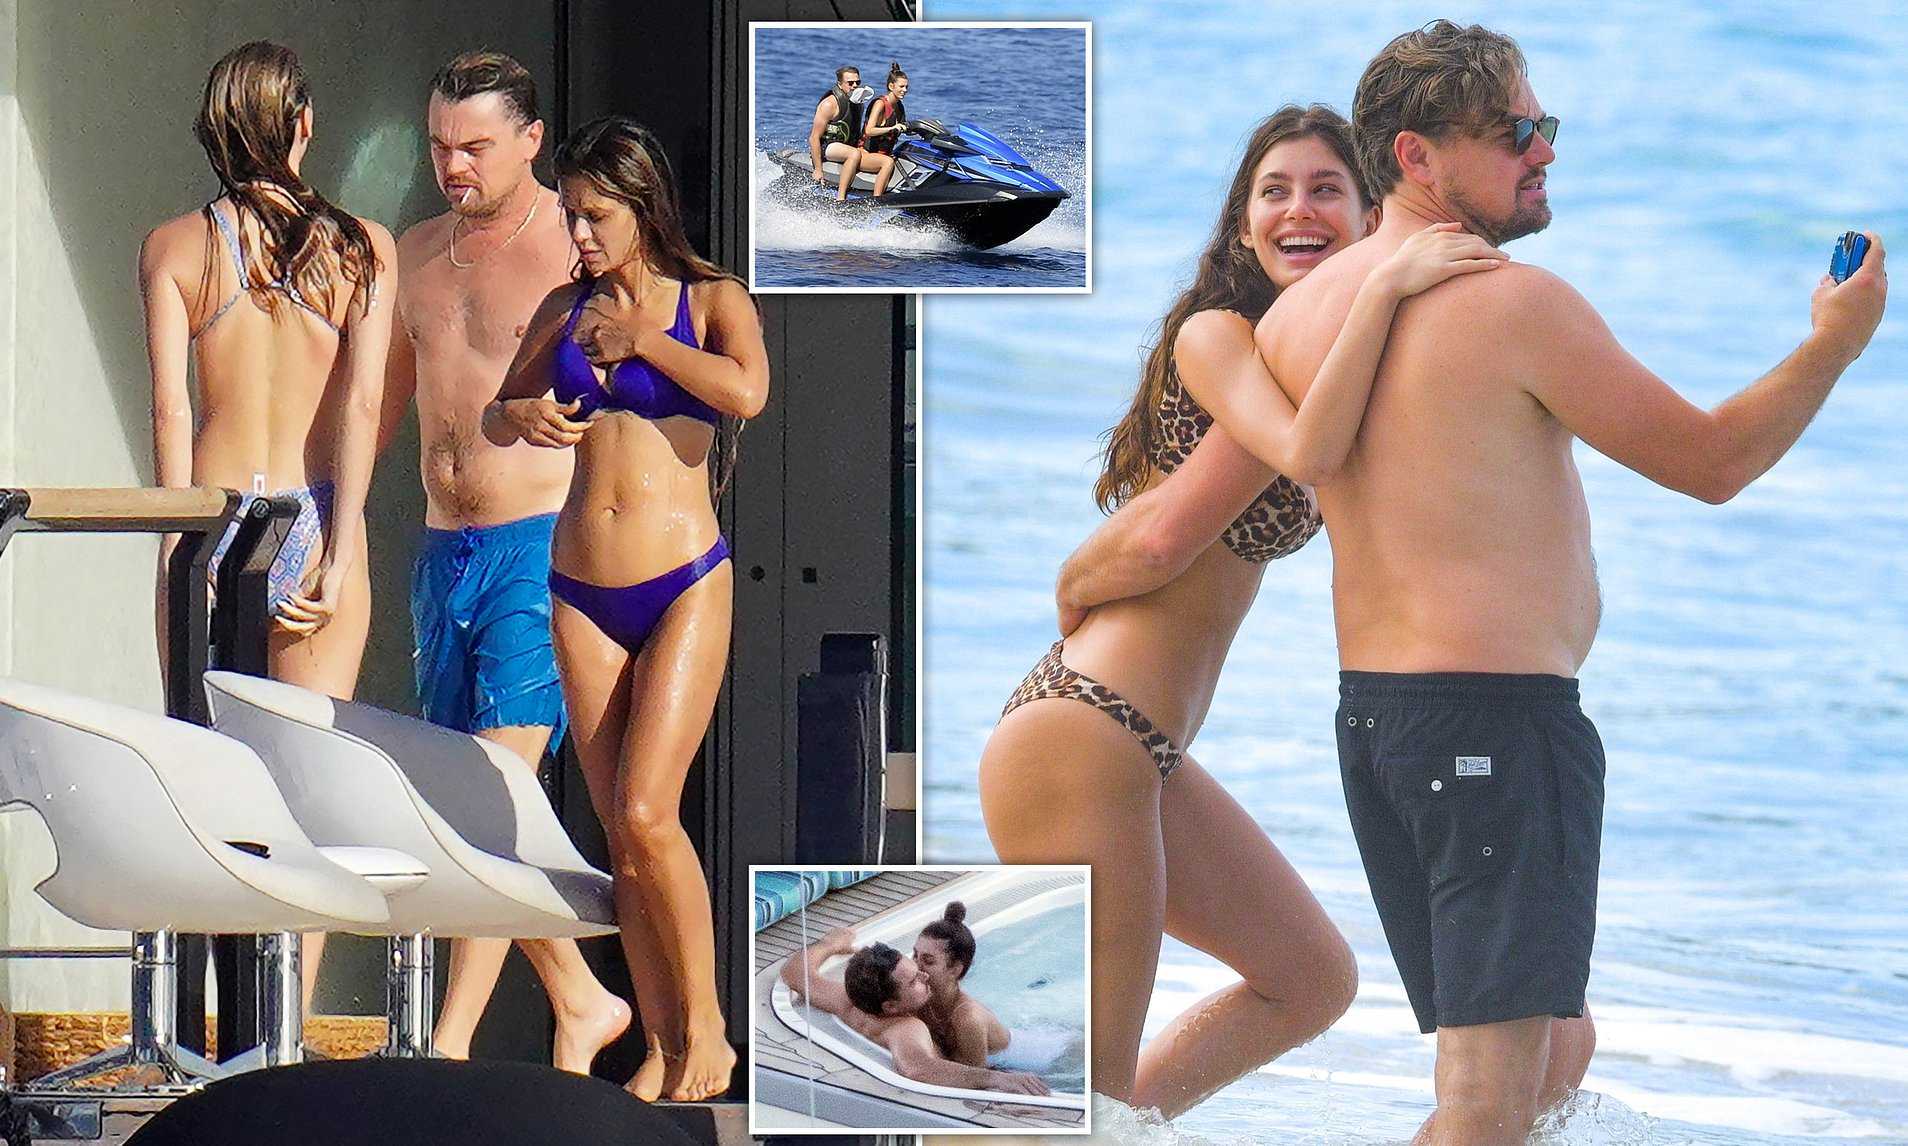 Leonardo DiCaprio's new spin: Hanging out with 20-somethings, strictly platonic